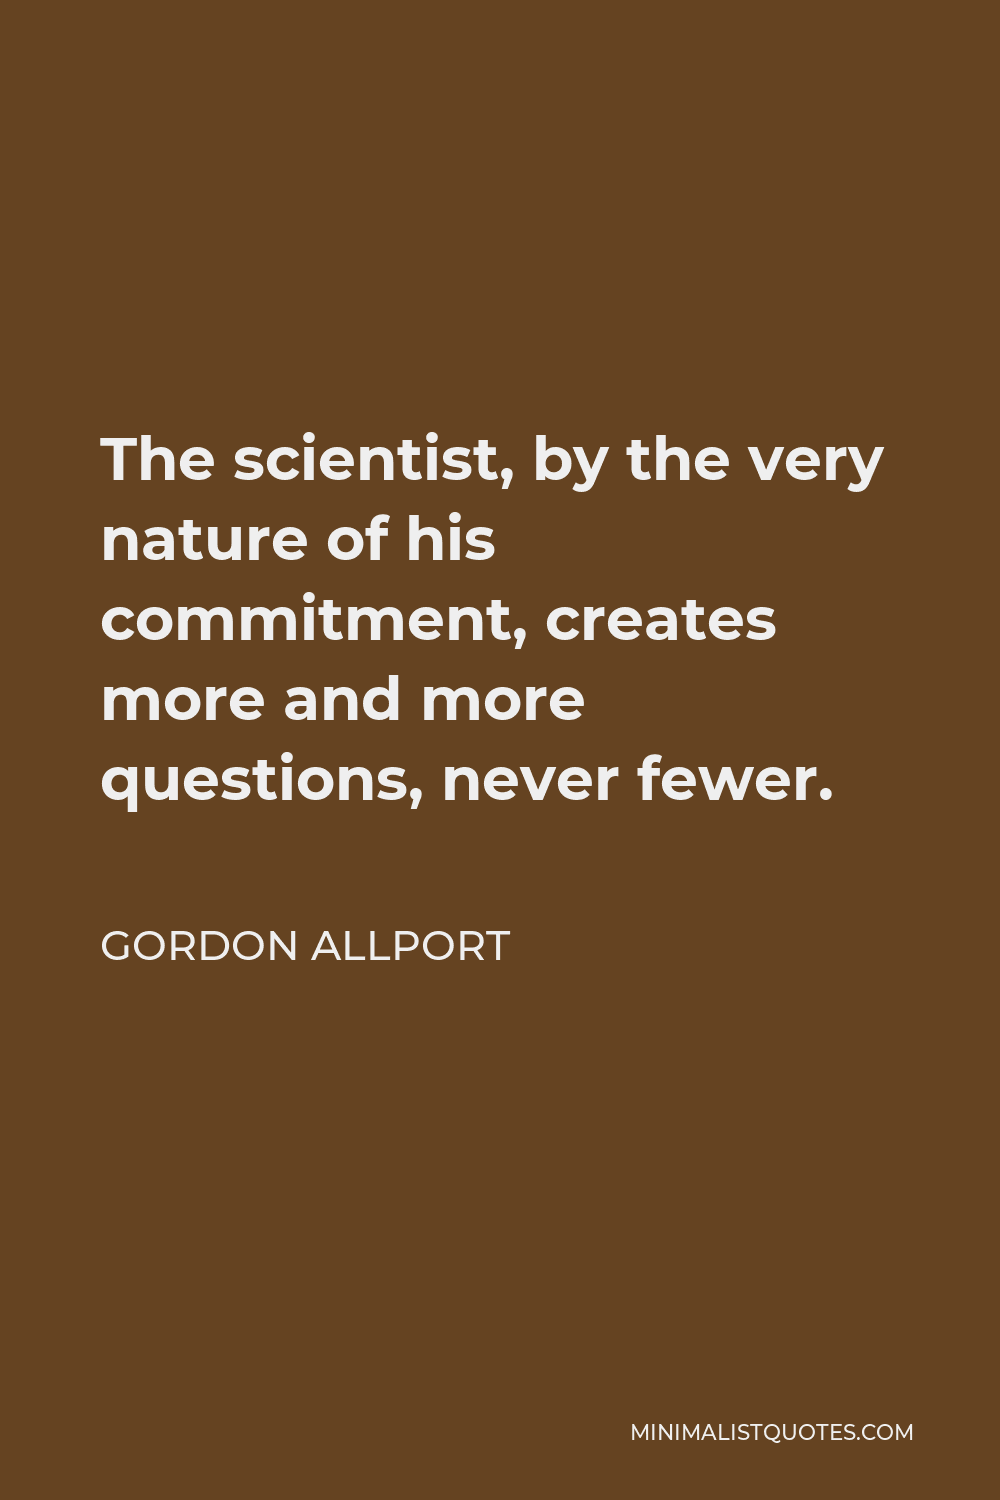 Gordon Allport Quote - The scientist, by the very nature of his commitment, creates more and more questions, never fewer.